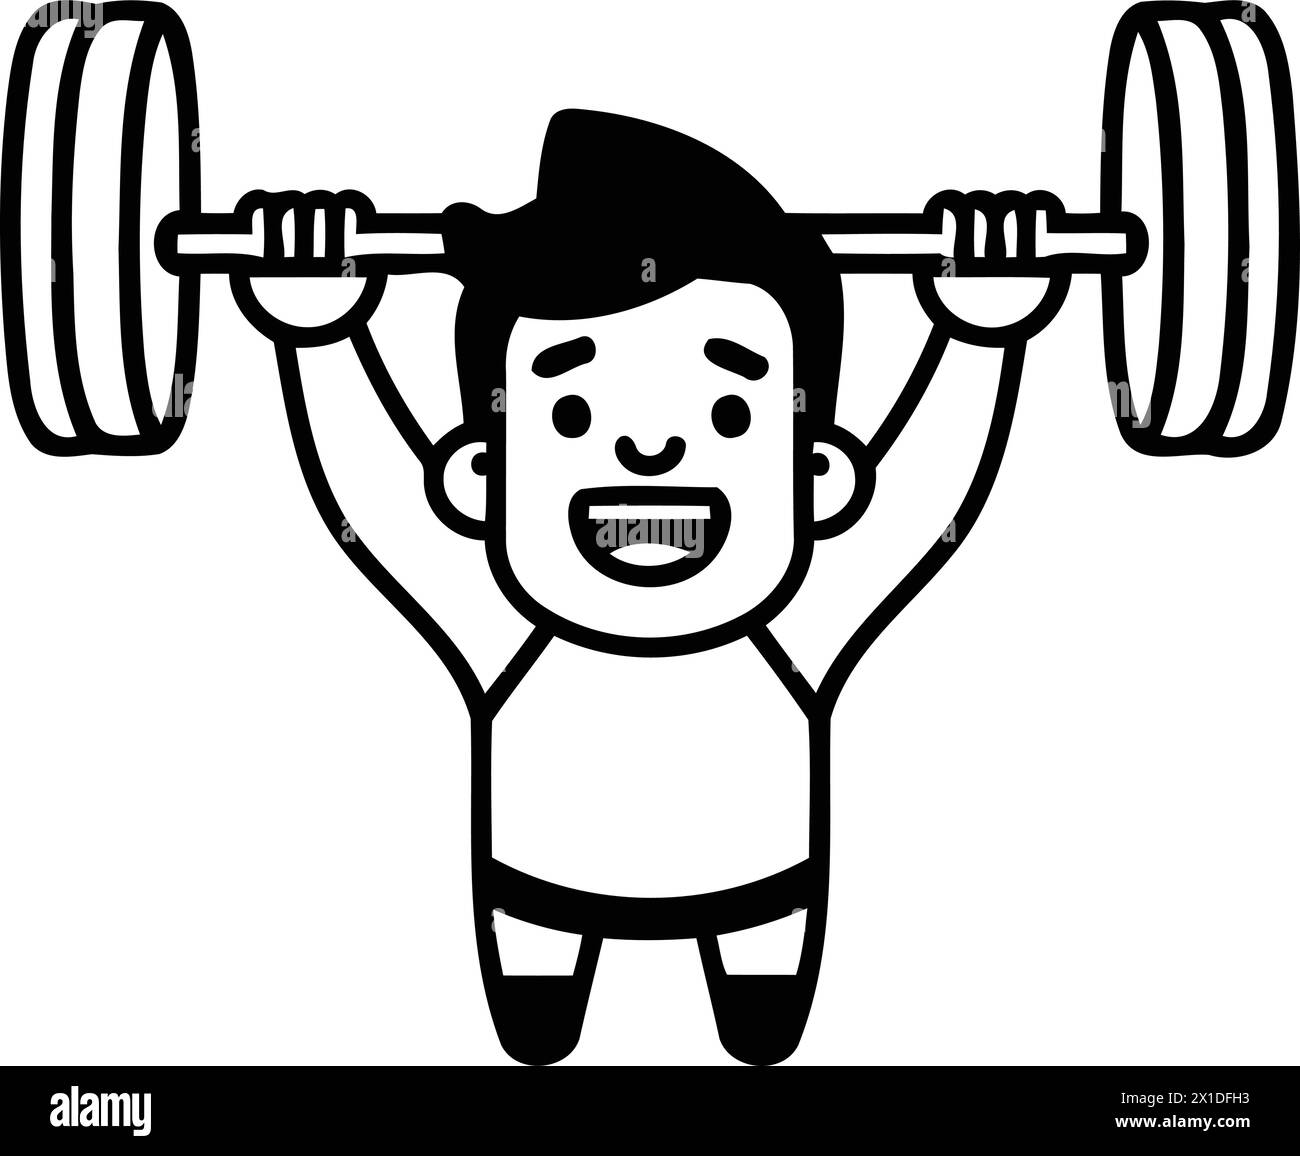 Fitness boy character with dumbbells. Flat style vector illustration. Stock Vector